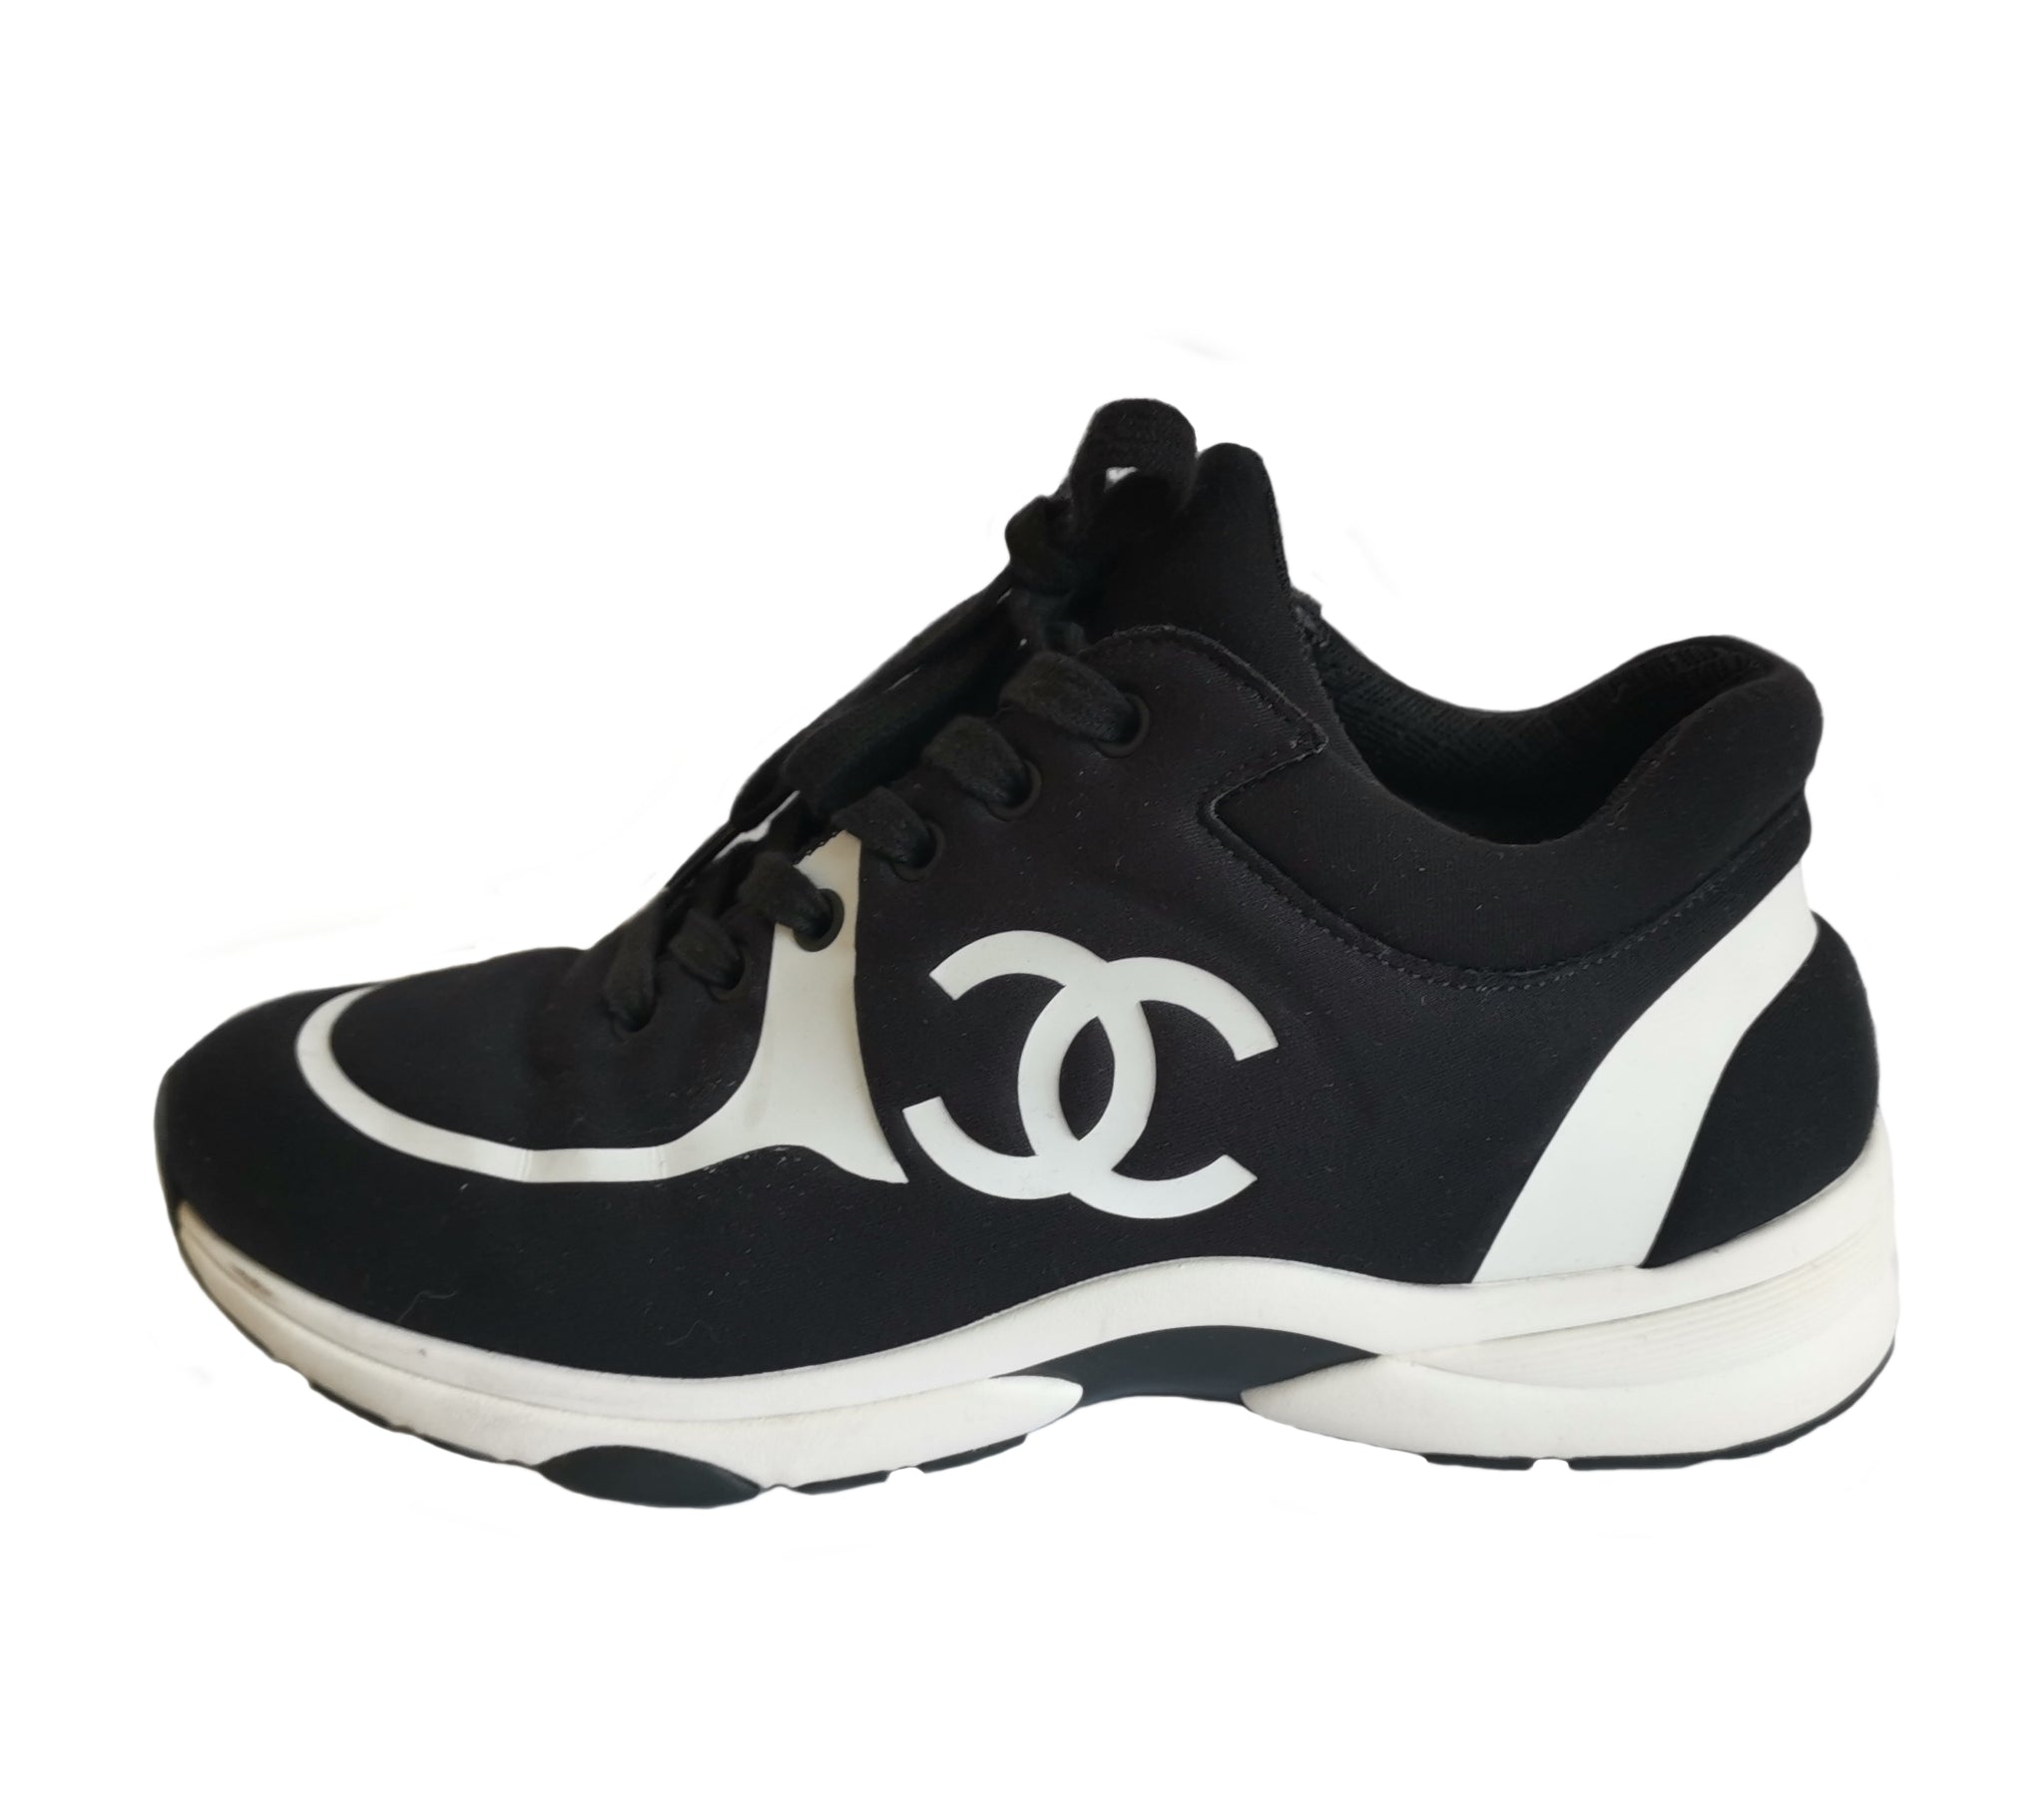 Authentic CHANEL CC logo Black & White Calfskin Sneakers Trainers Shoes Sz  38